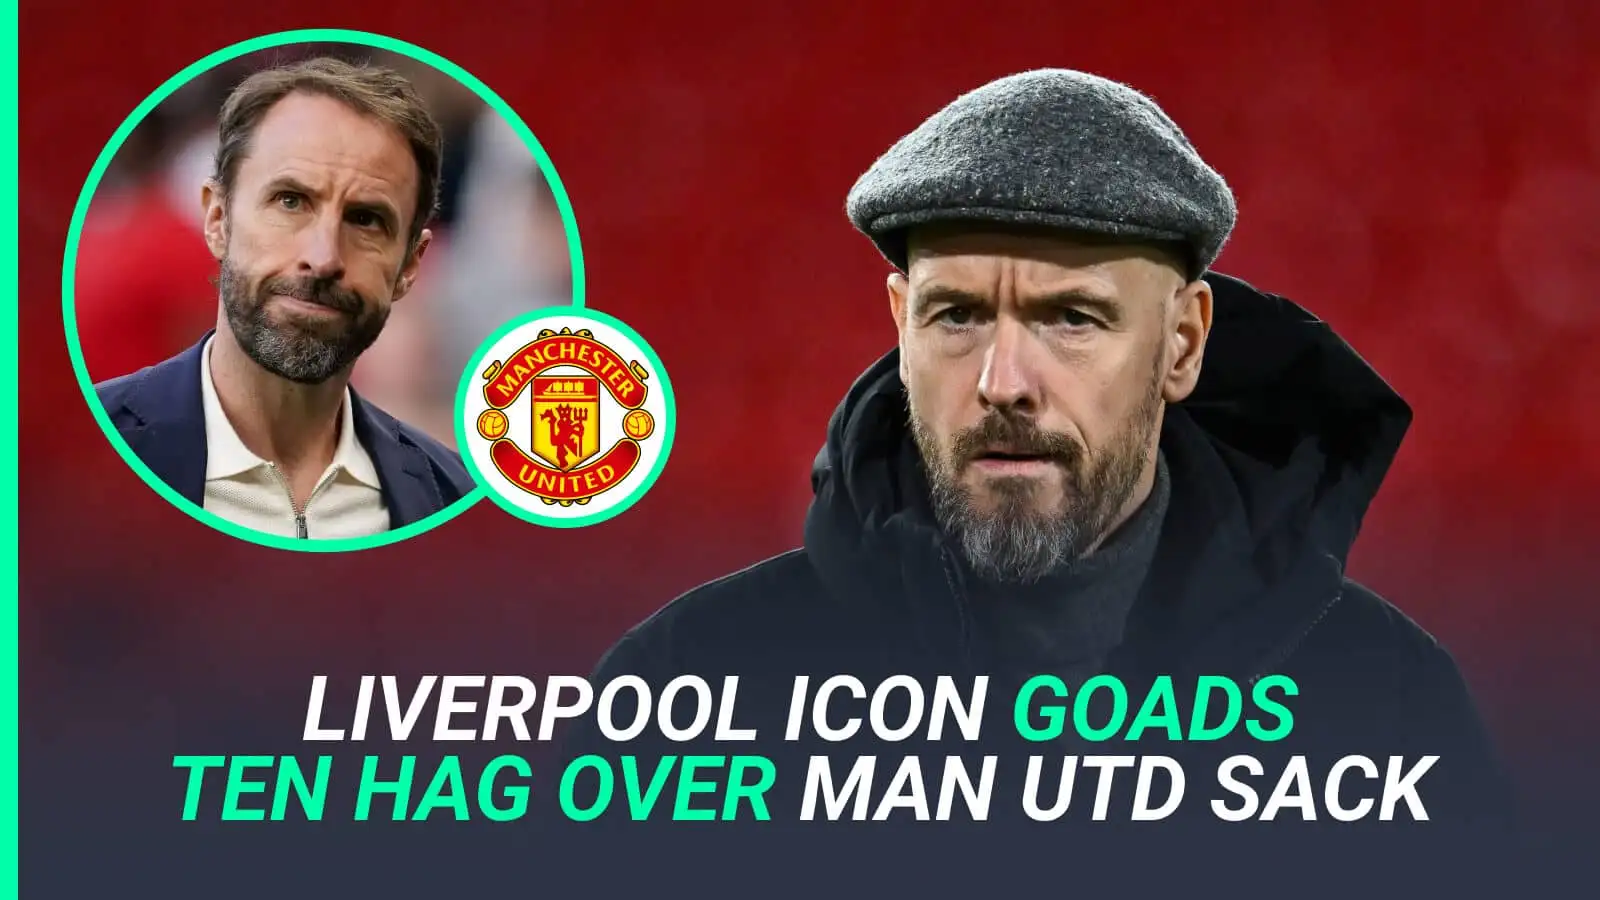 Next Man Utd manager: Liverpool man reveals identity of Ten Hag successor as top candidate responds in style